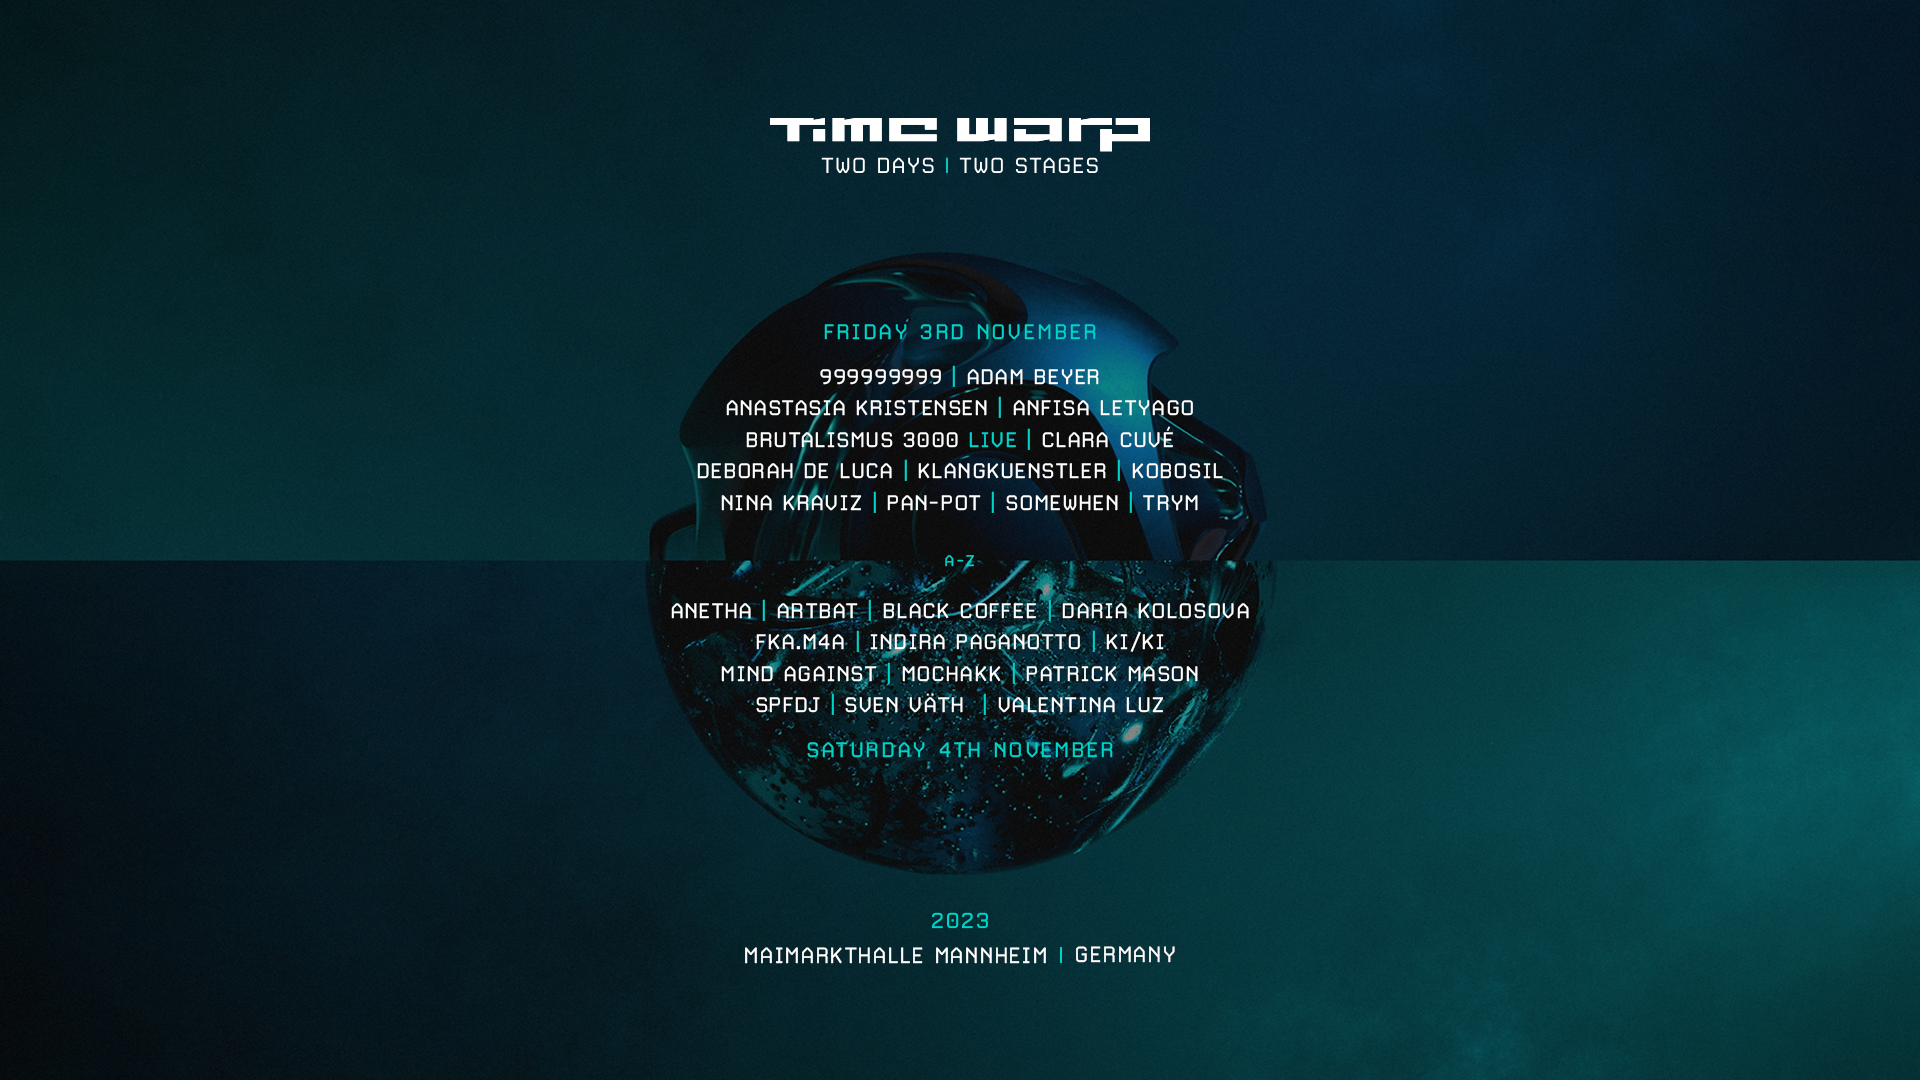 Time Warp Two Days / Two Stages - フライヤー裏